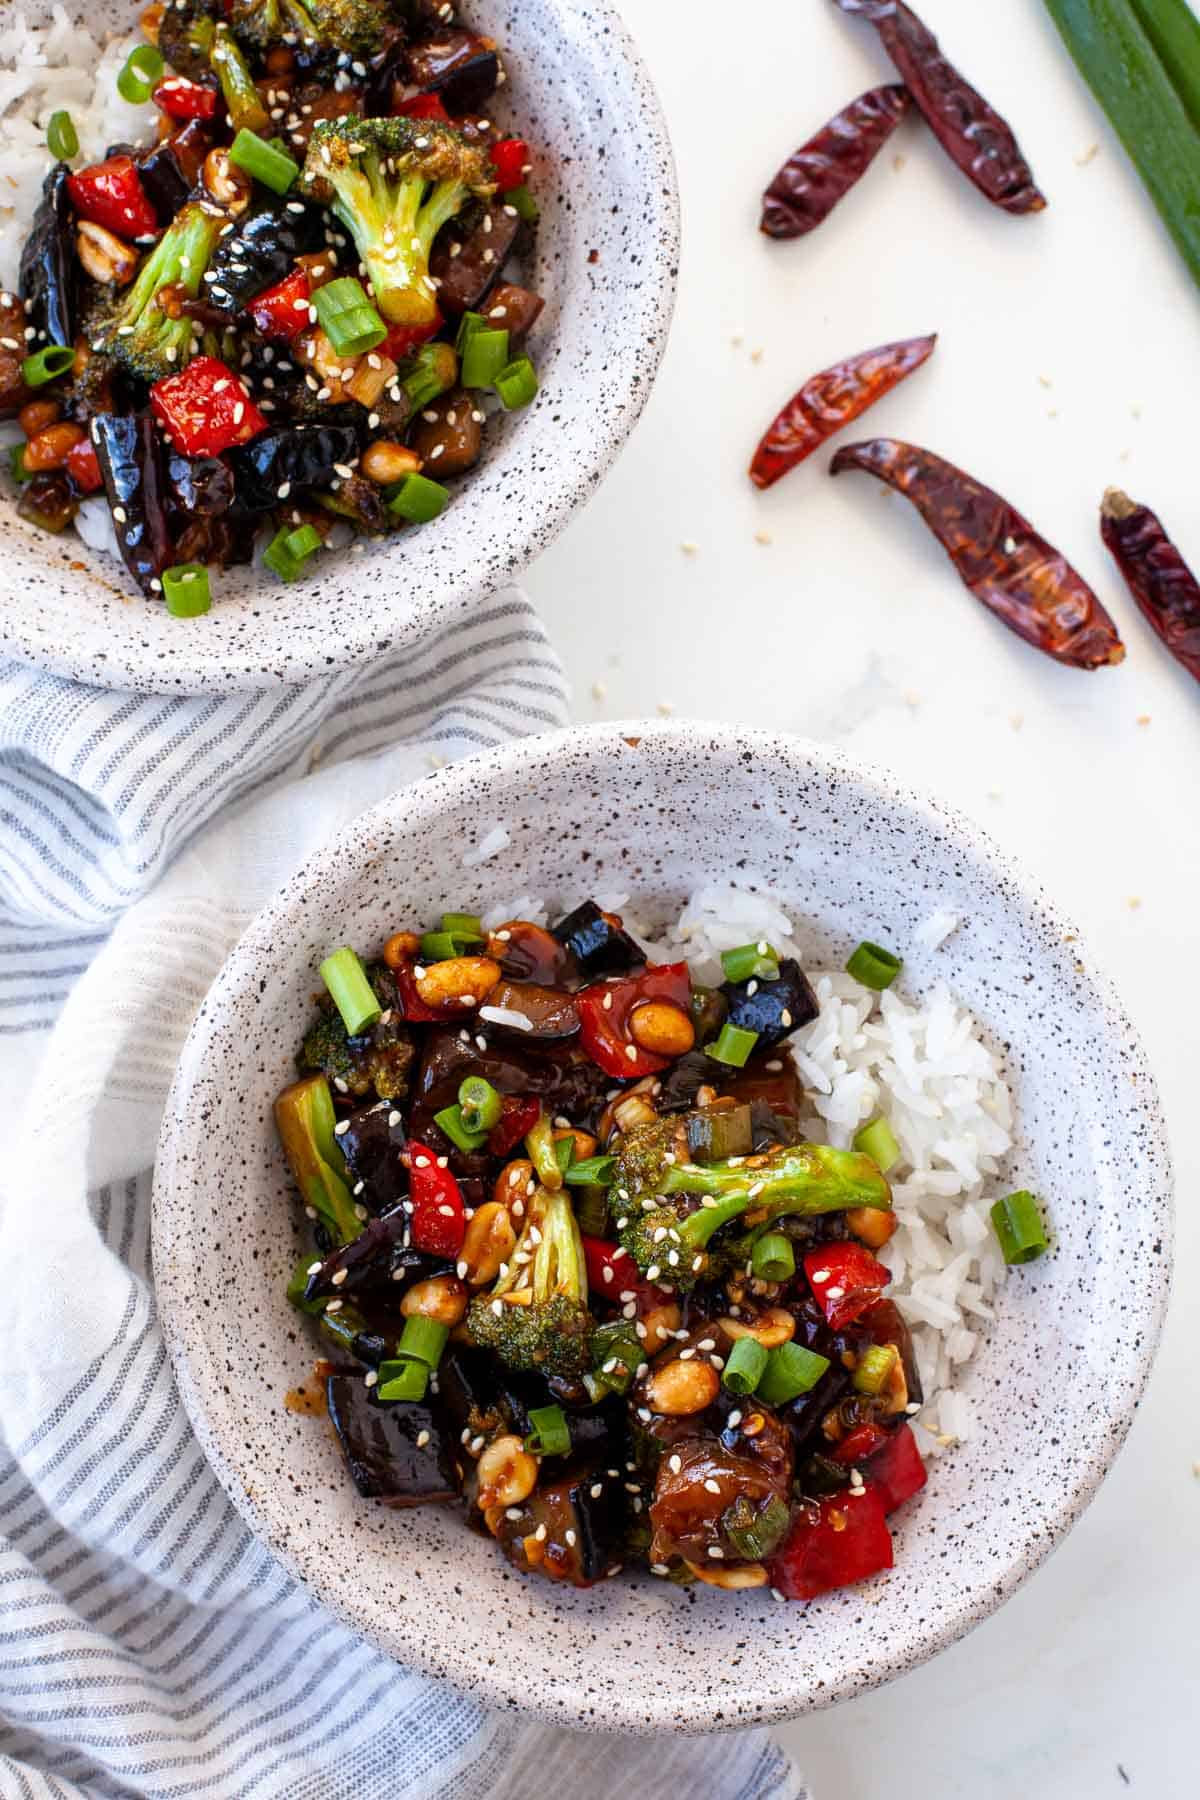 Kung Pao vegetables, dried chili and striped dish towel with rice in gray speckled bowl